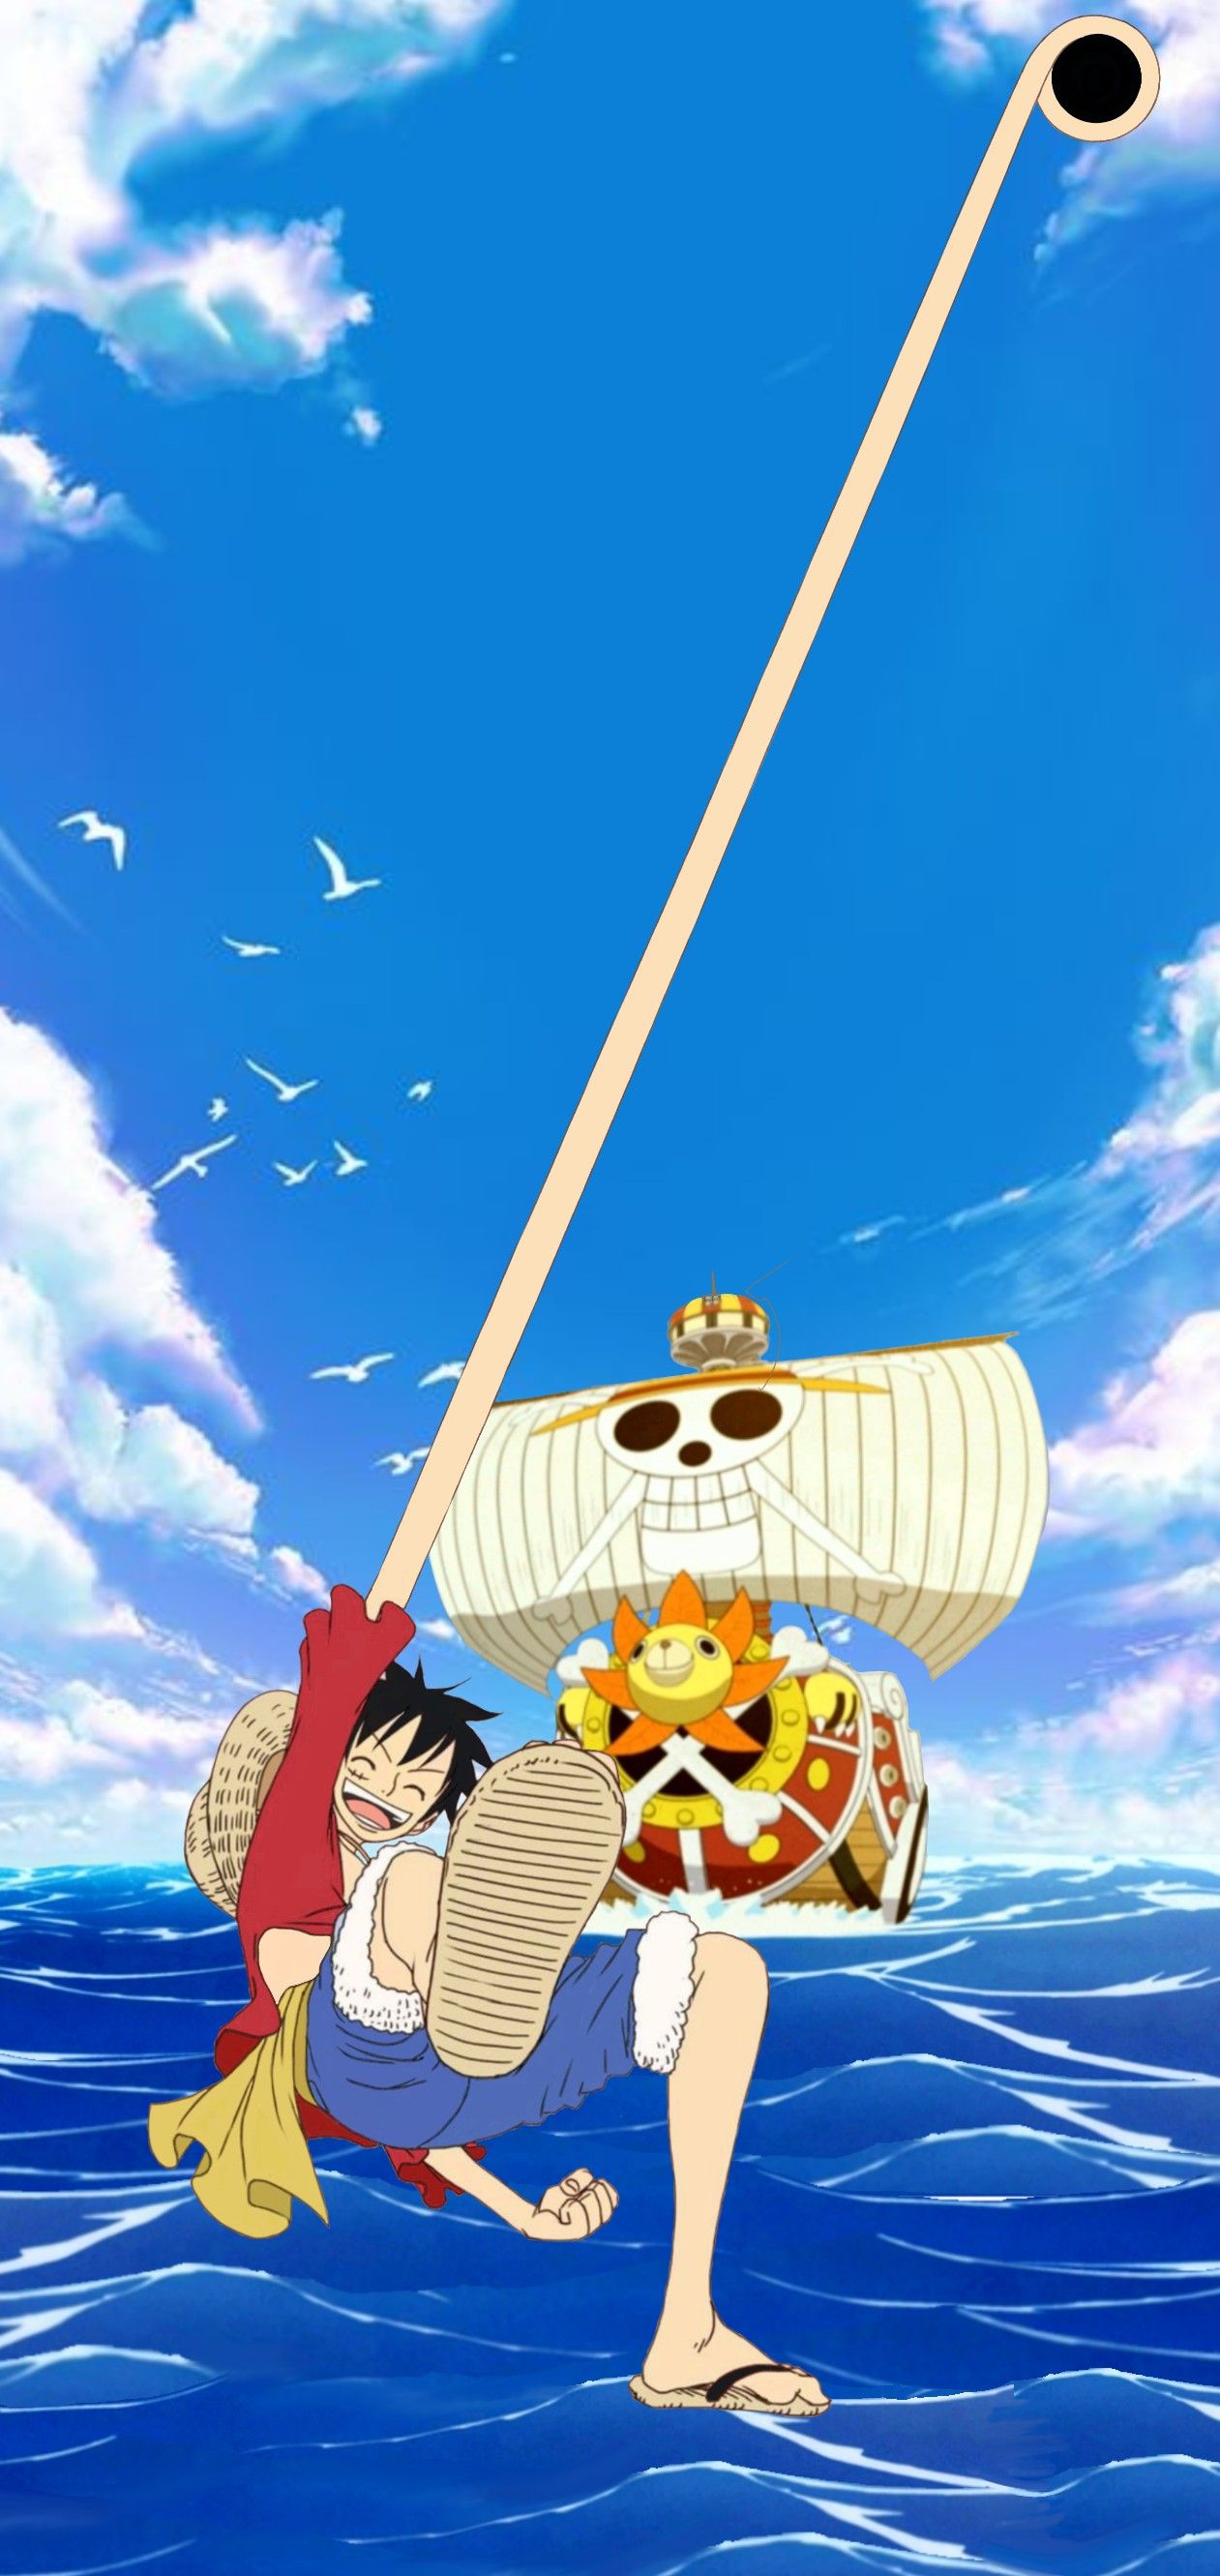 Ps4 Anime One Piece Wanted Wallpapers - Wallpaper Cave